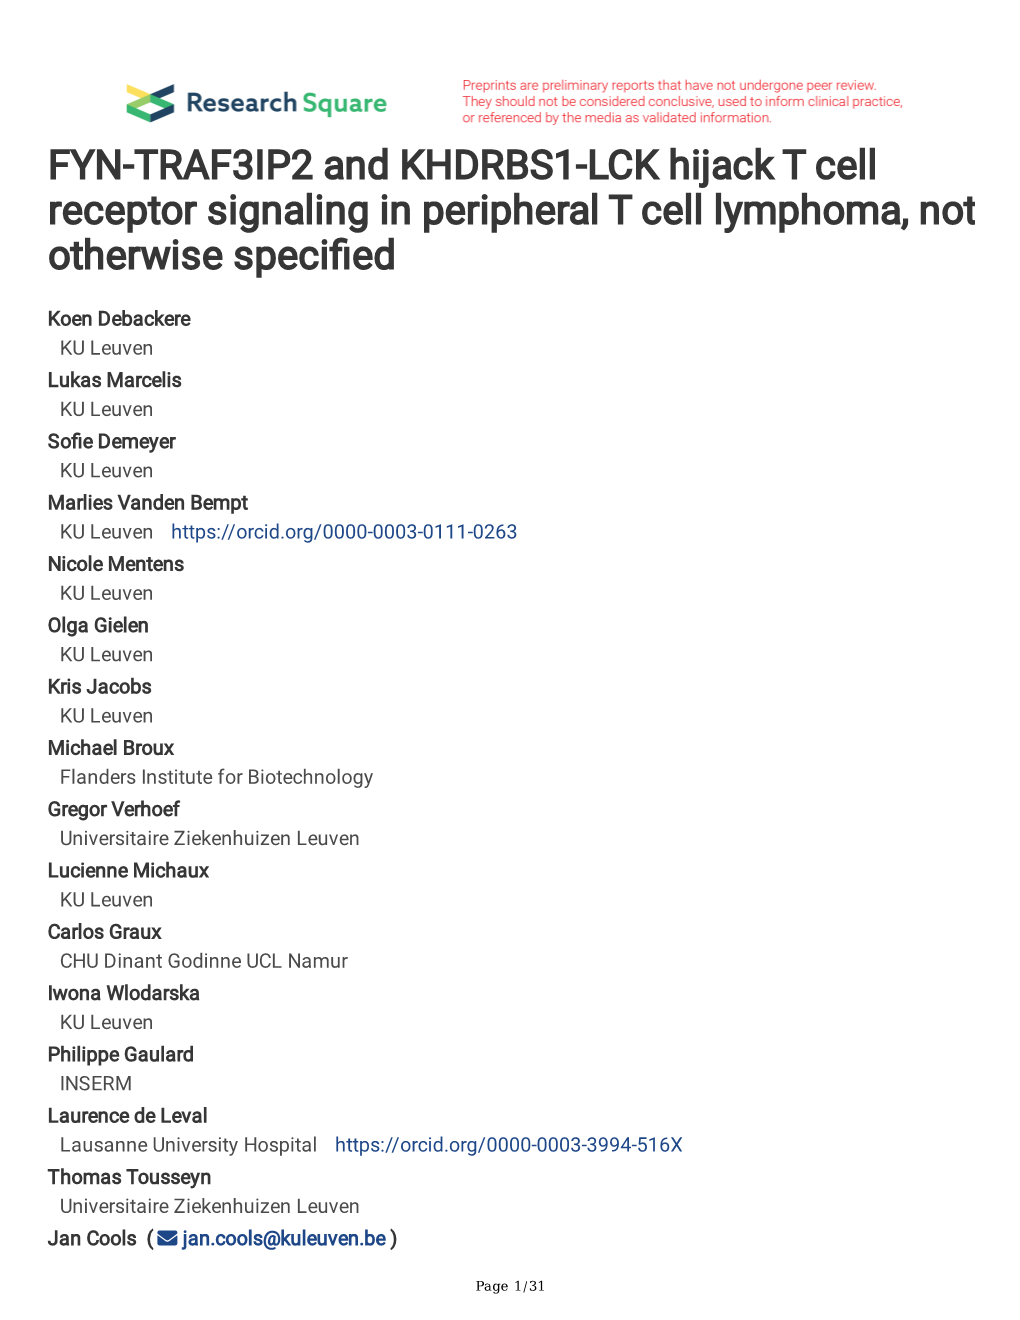 FYN-TRAF3IP2 and KHDRBS1-LCK Hijack T Cell Receptor Signaling in Peripheral T Cell Lymphoma, Not Otherwise Specifed